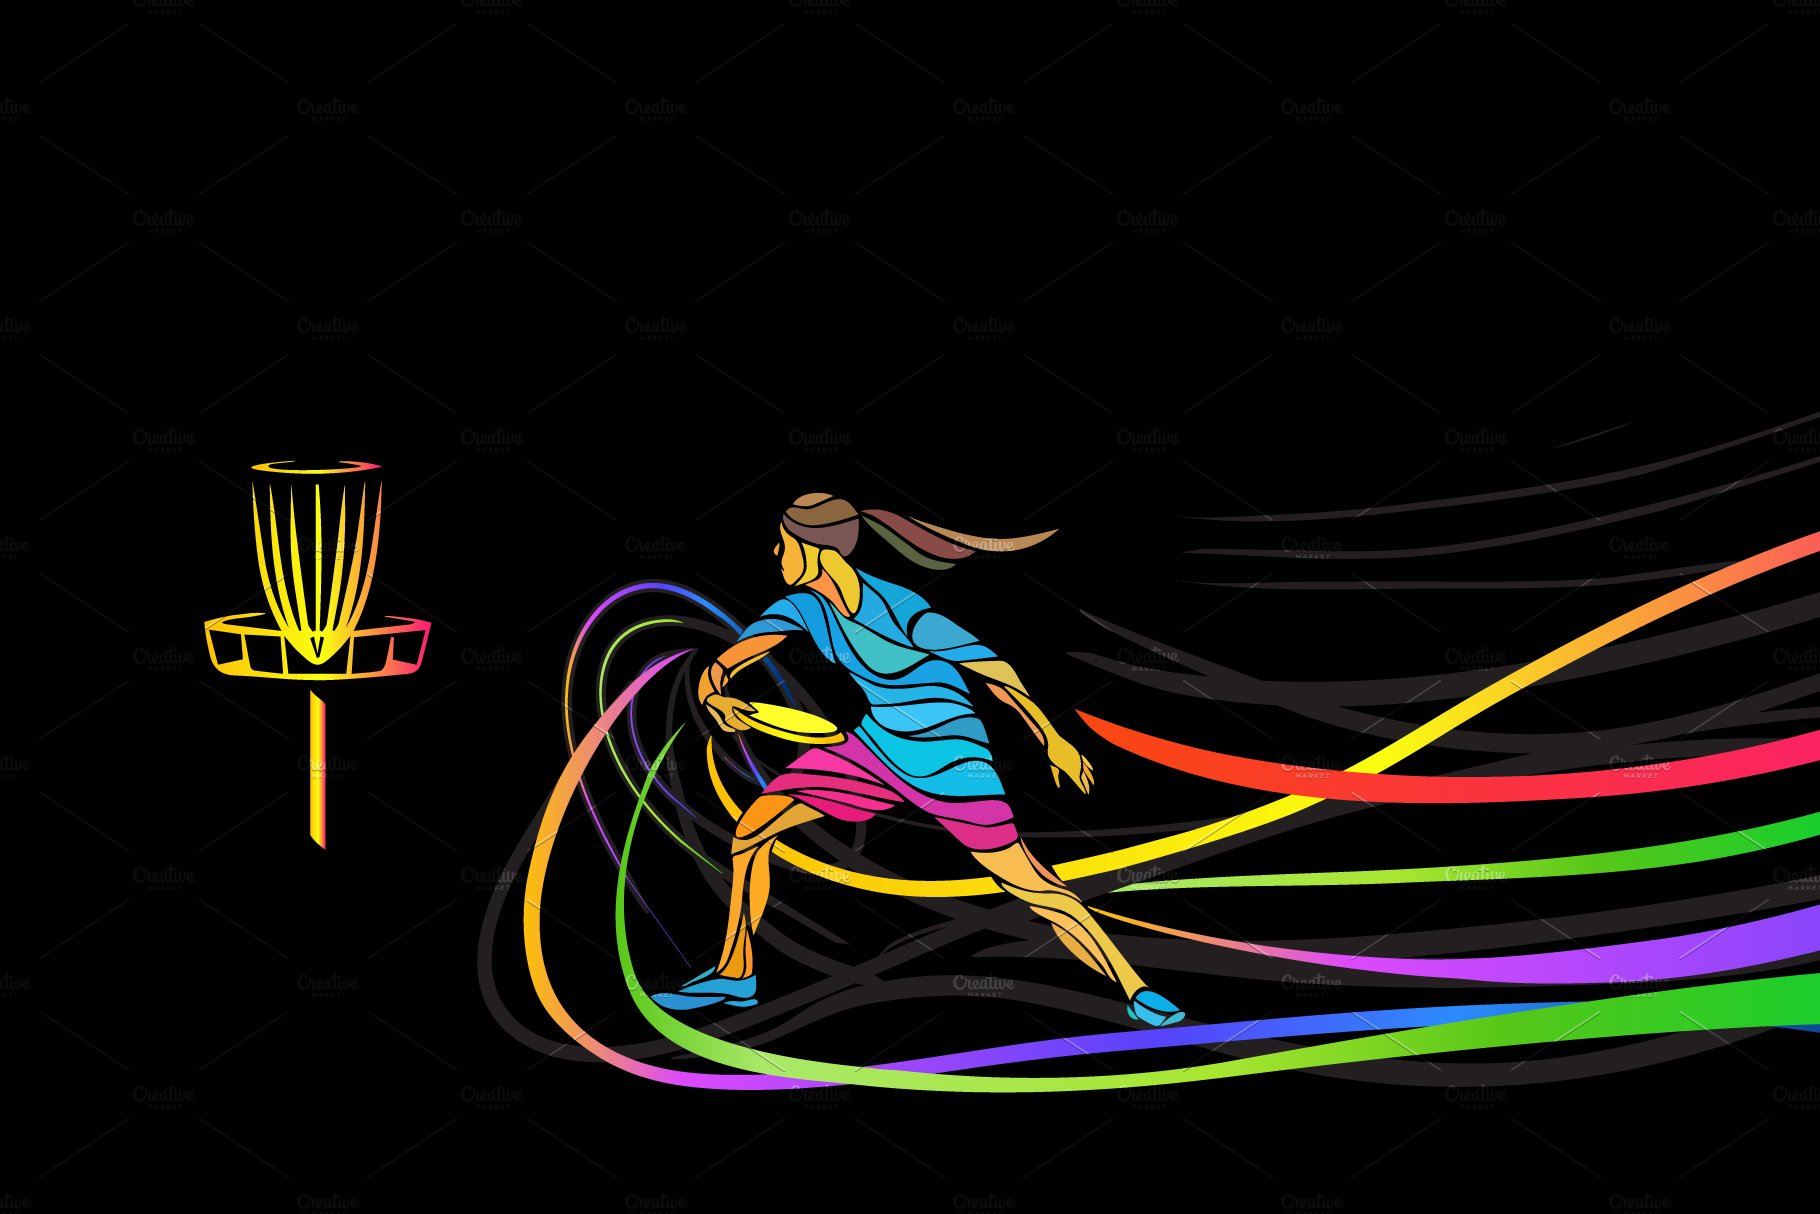 Disc Golf Woman Illustration vector cover image.